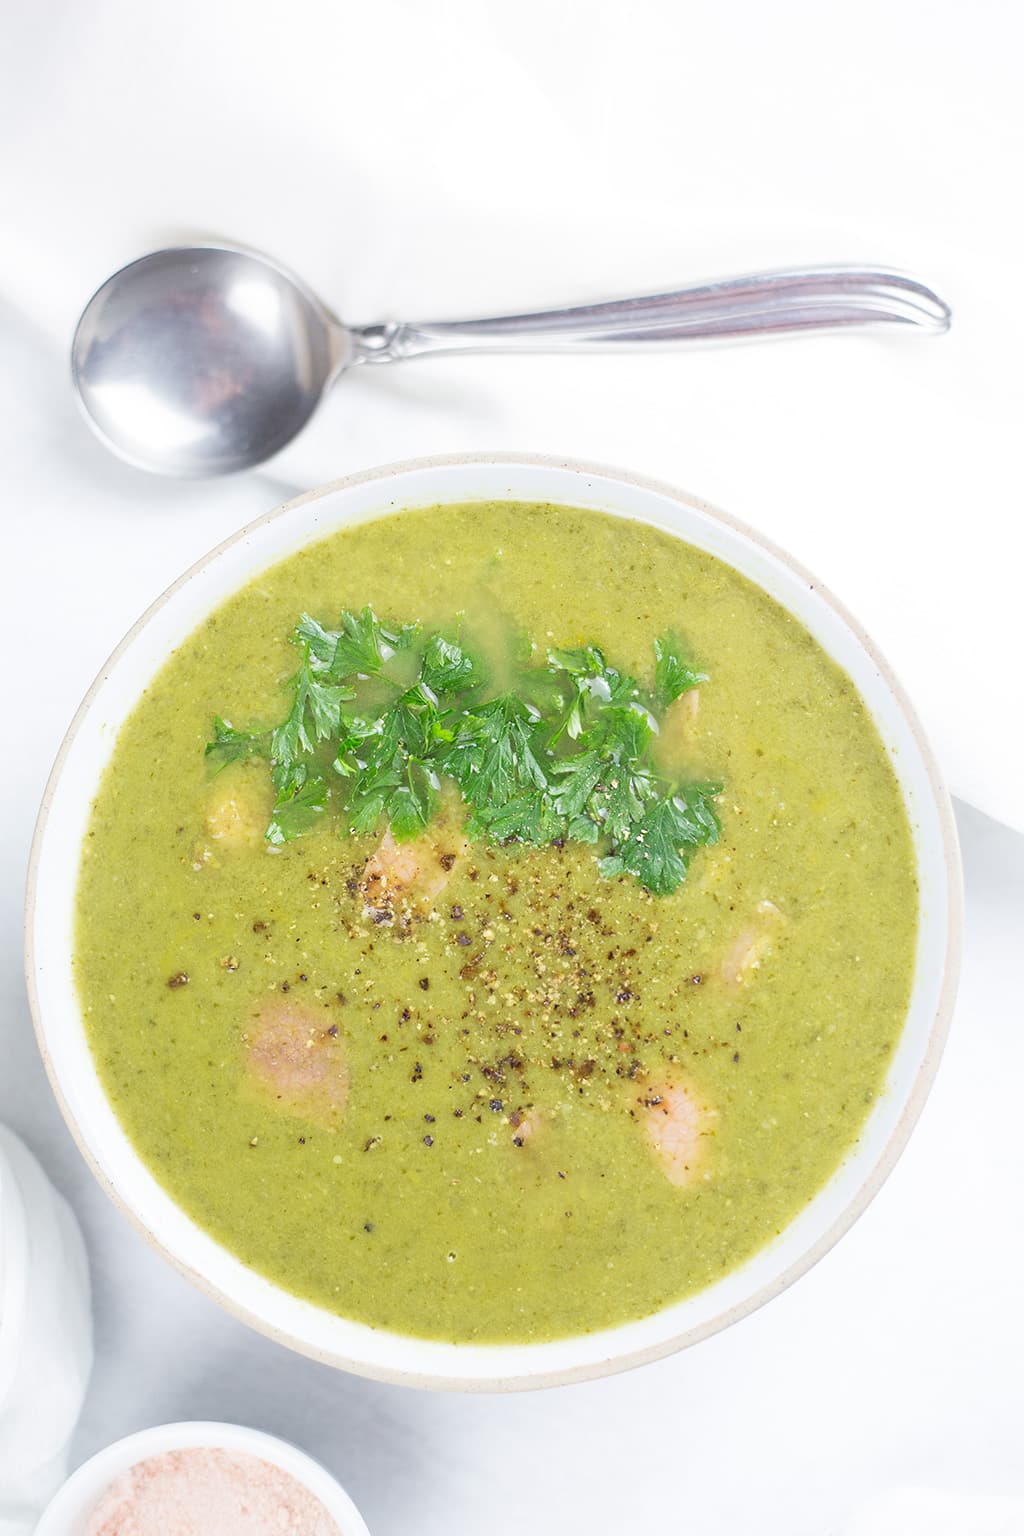 Birds eye view of pea and ham soup with parsley on top, silver spoon to the side and bowl of sea salt on other side.